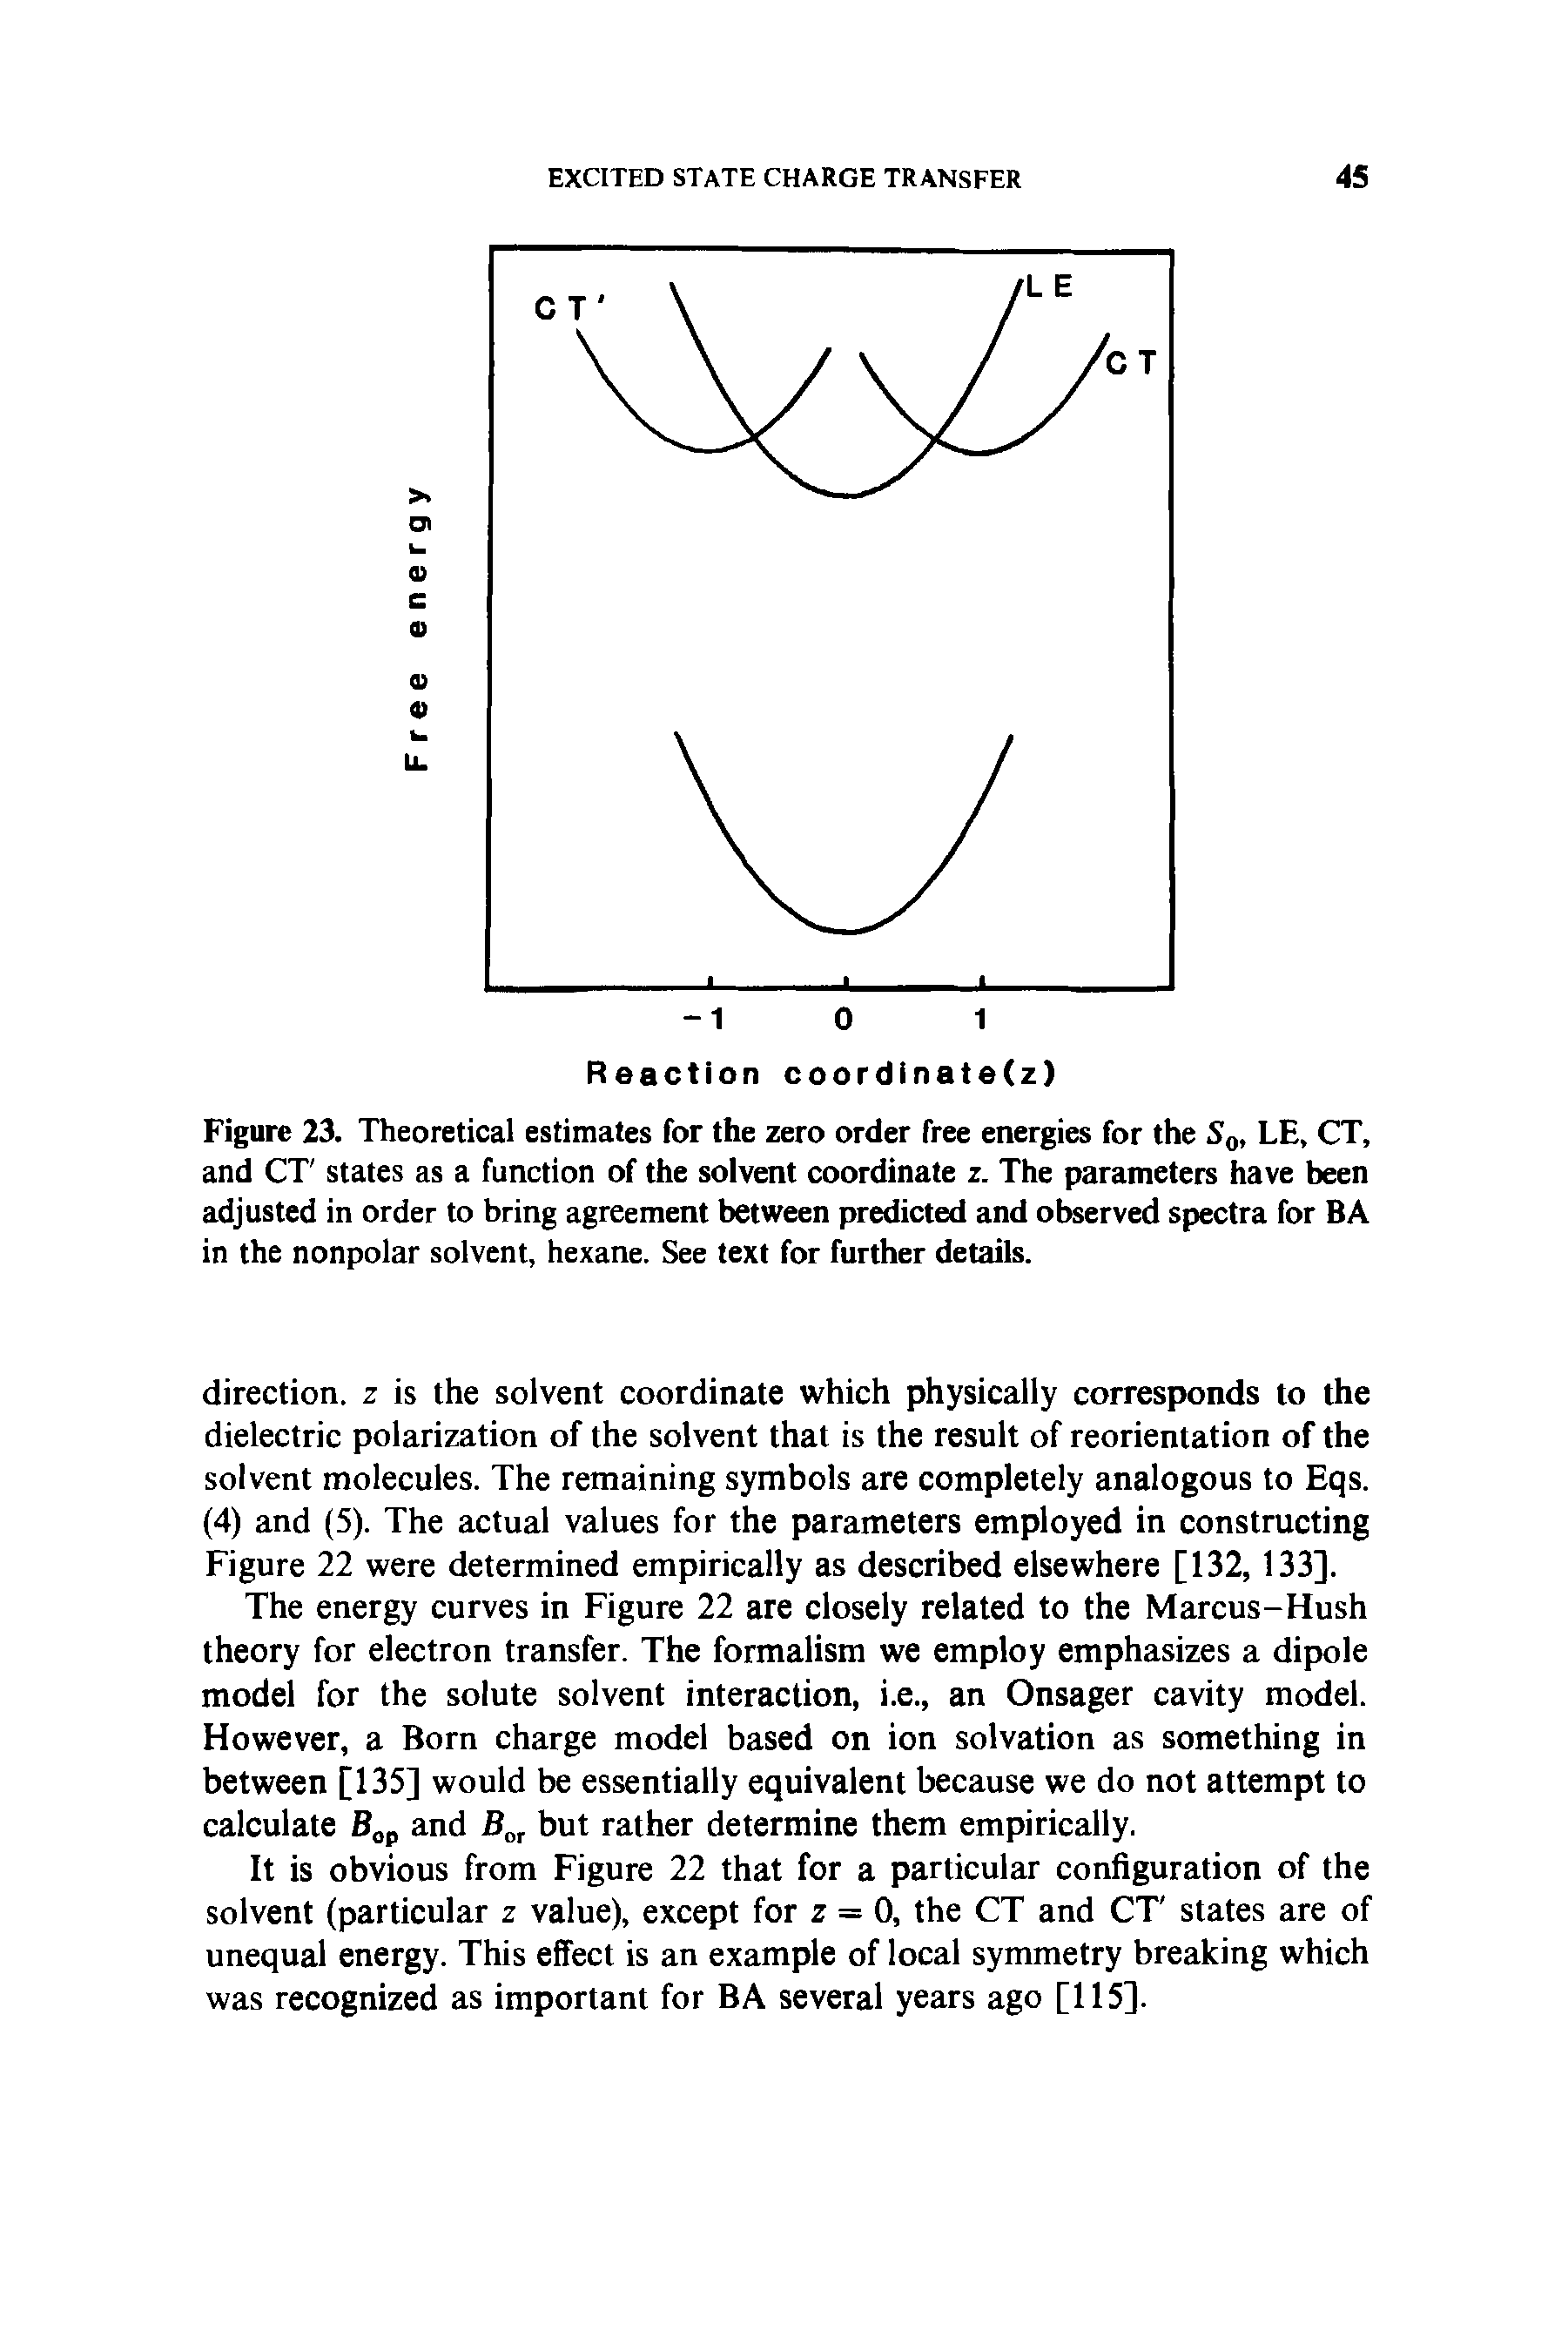 Figure 23. Theoretical estimates for the zero order free energies for the S0, LE, CT, and CT states as a function of the solvent coordinate z. The parameters have been adjusted in order to bring agreement between predicted and observed spectra for BA in the nonpolar solvent, hexane. See text for further details.